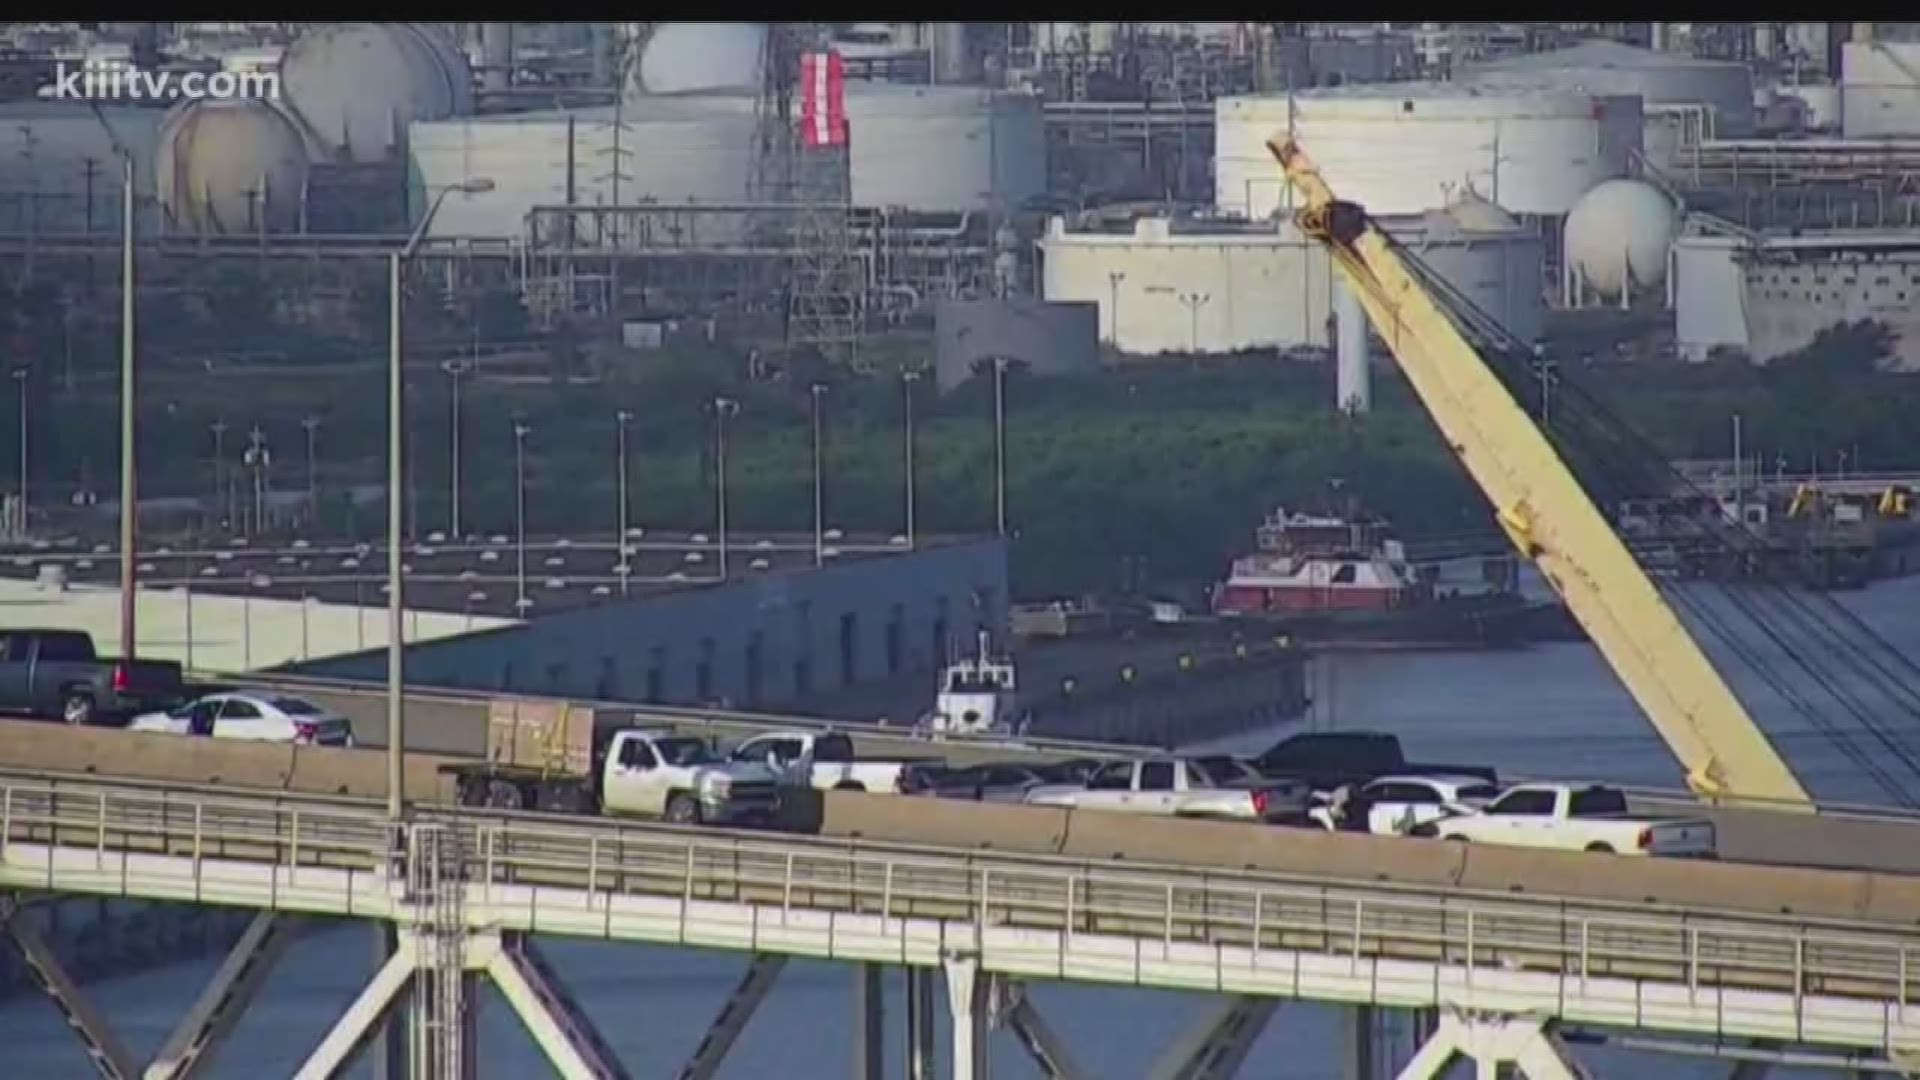 The Corpus Christi Police and Fire departments were sent to a multiple vehicle accident Wednesday morning that caused traffic to back up on the Harbor Bridge.